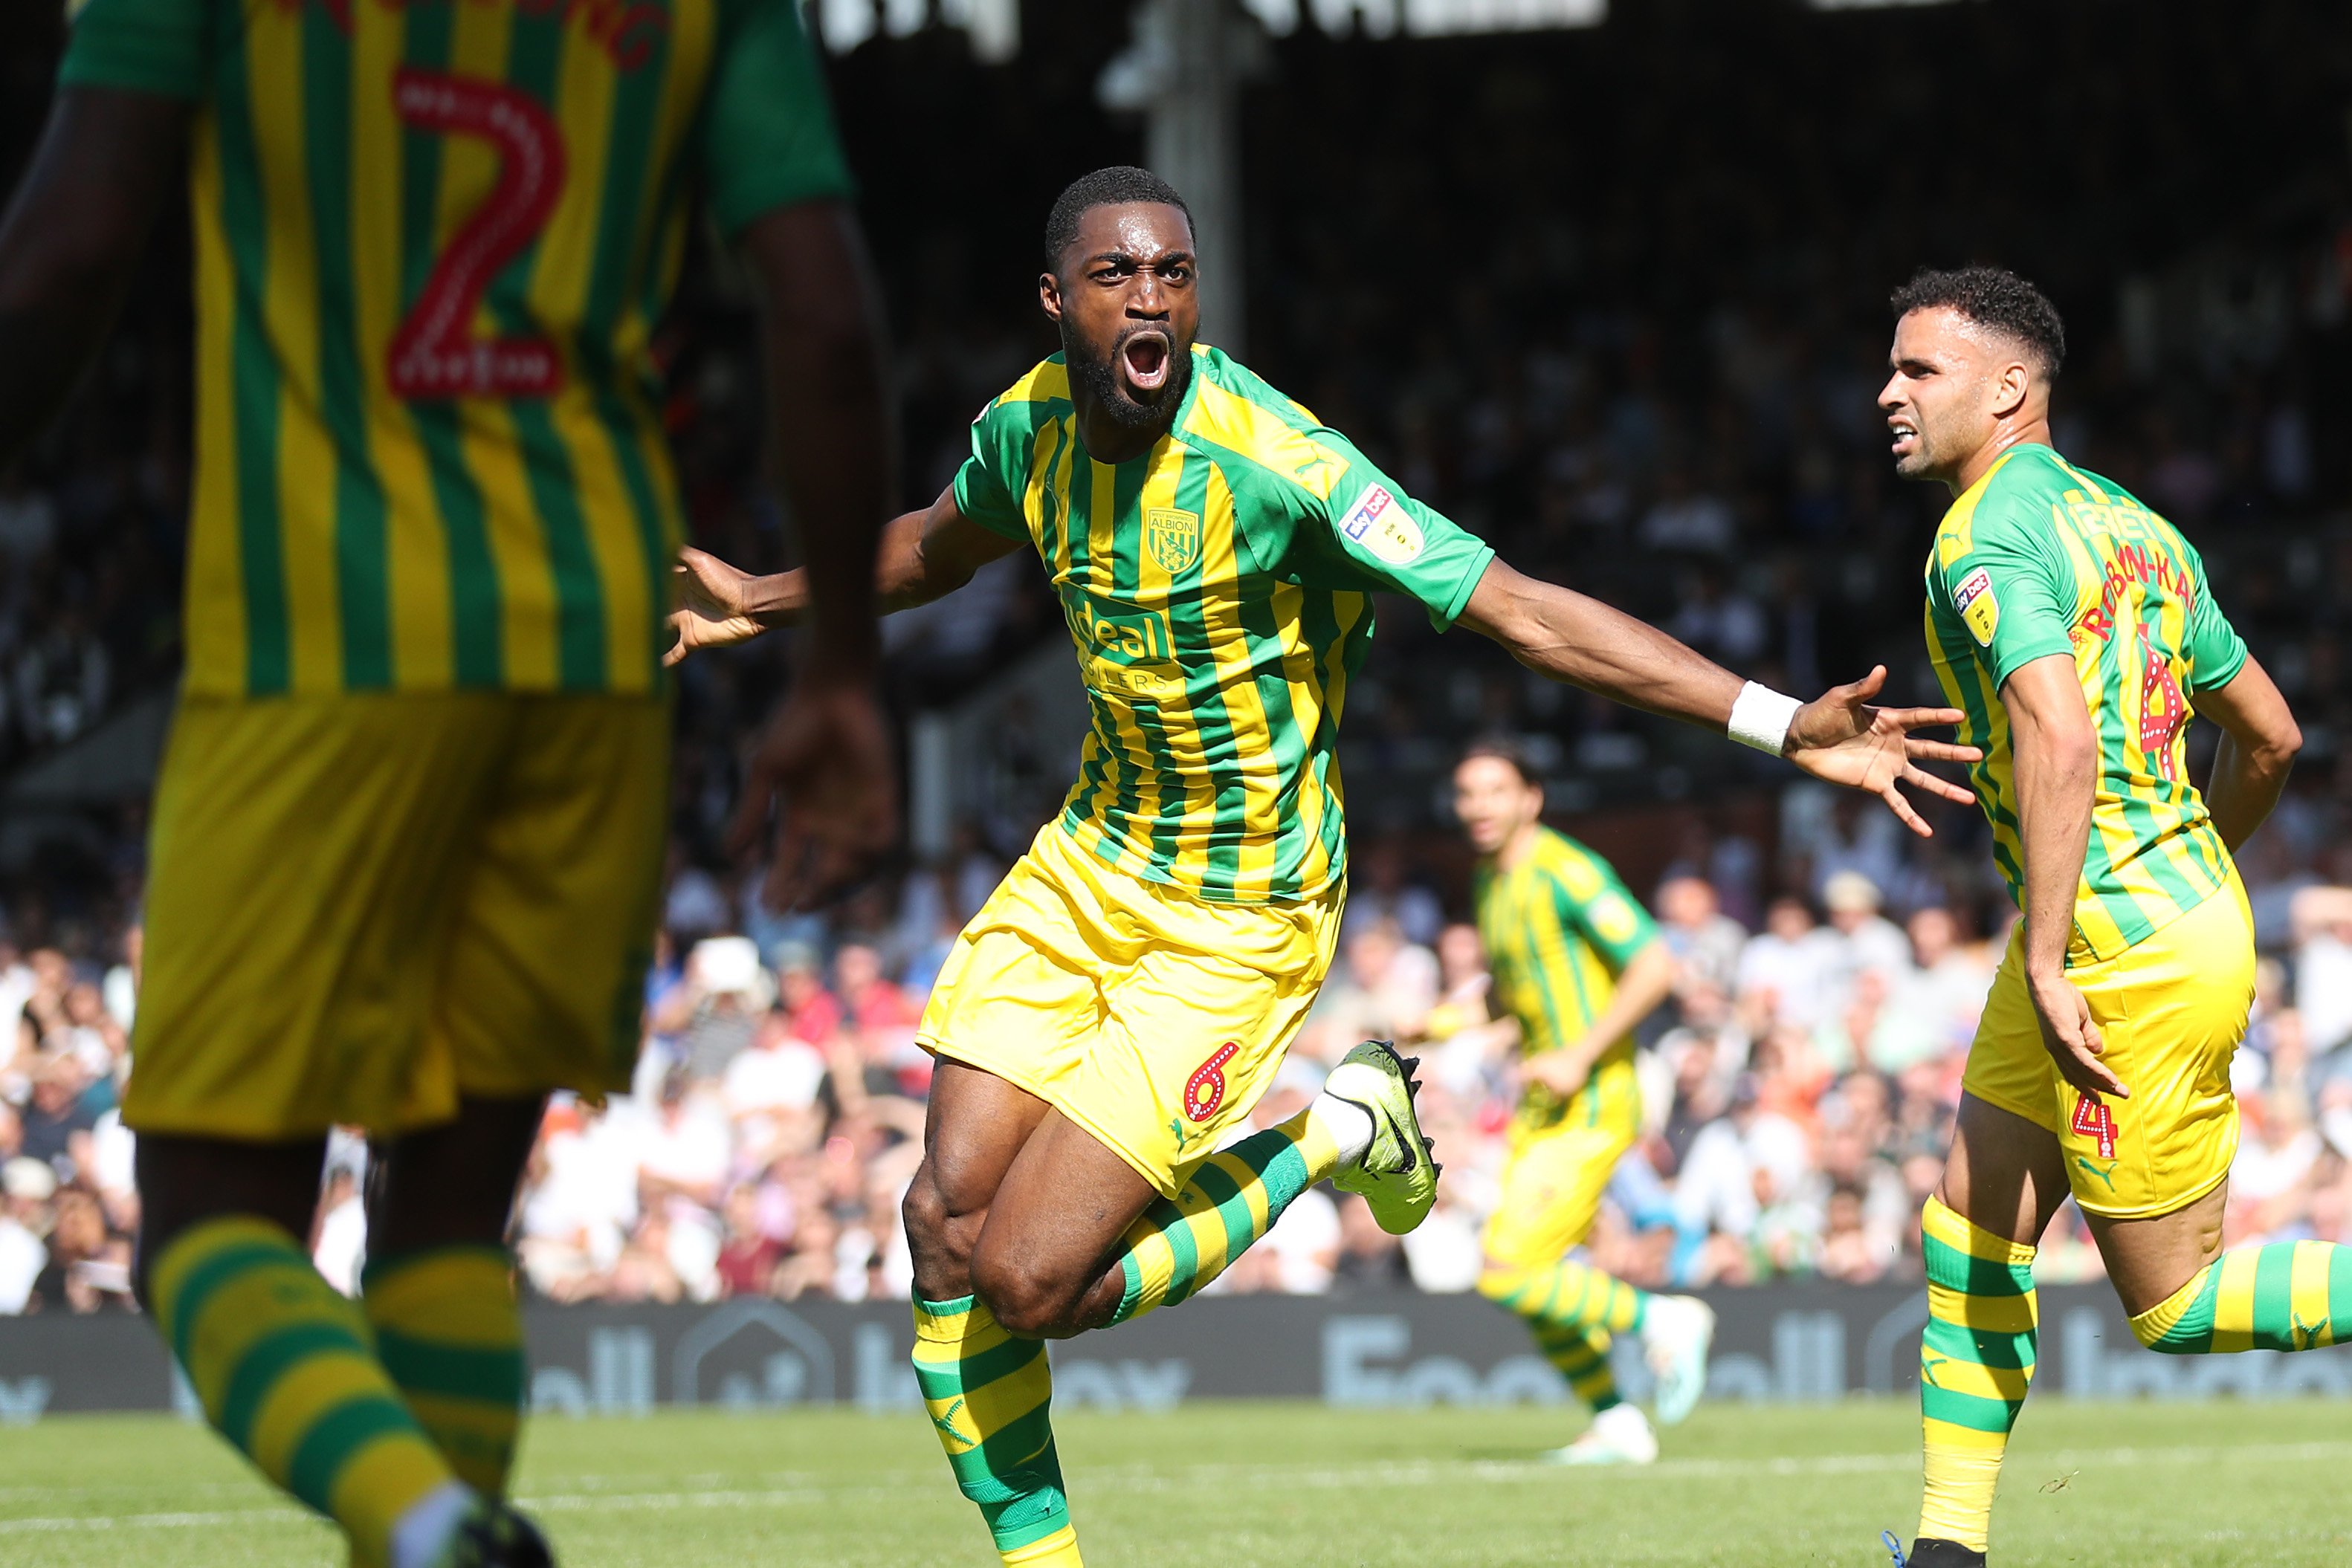 Ajayi: It’s Amazing To Score My First West Brom Goal